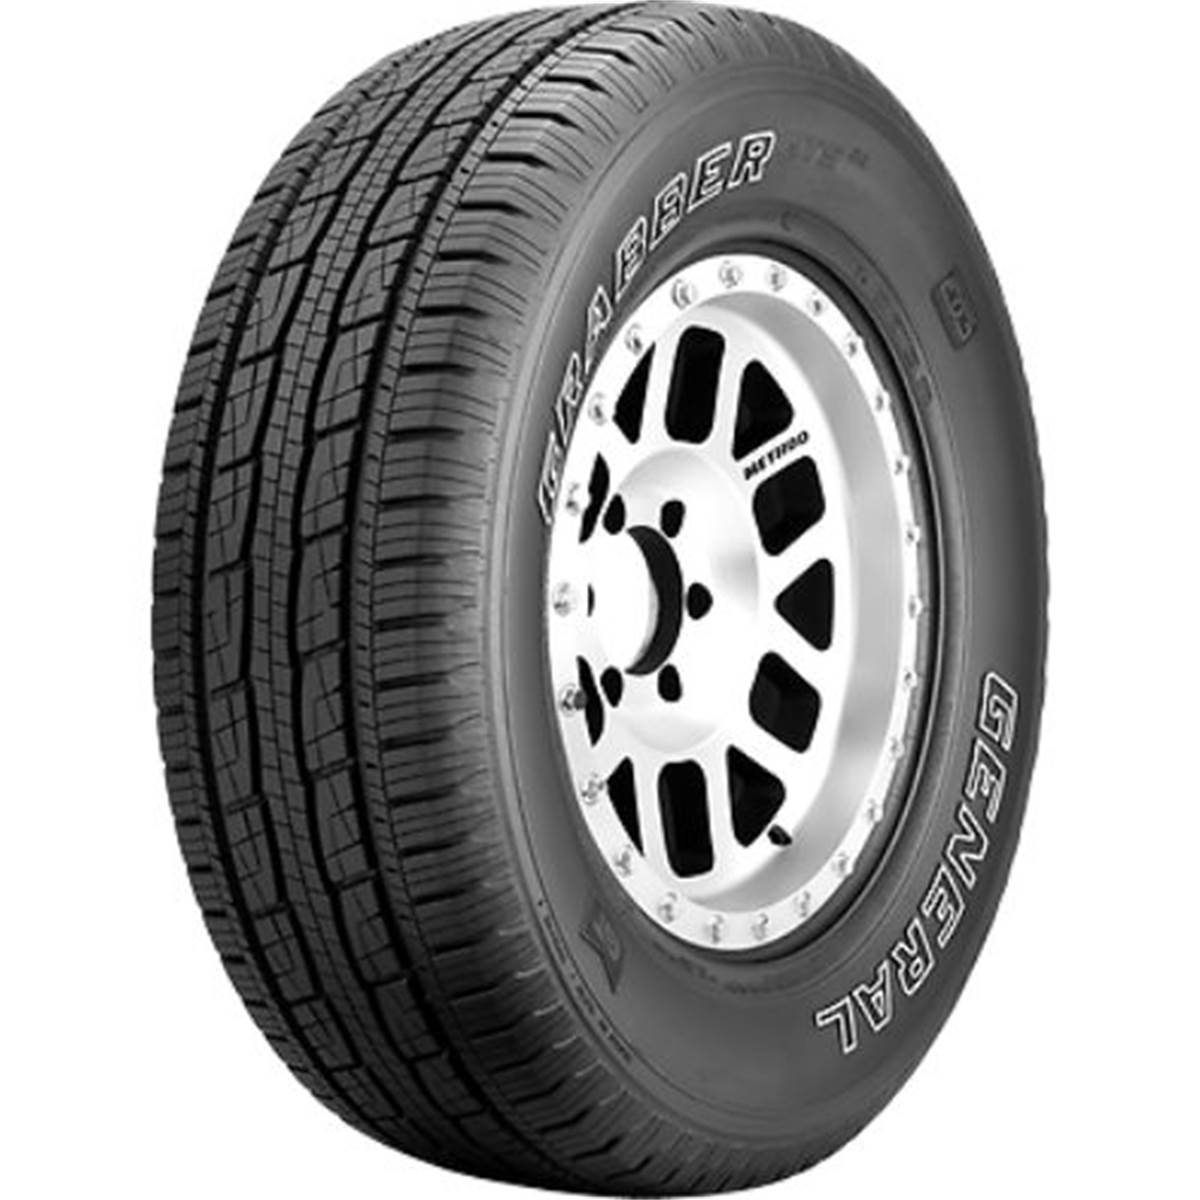 General Tire Neumático  Grabber Hts60 245/65R17 111T